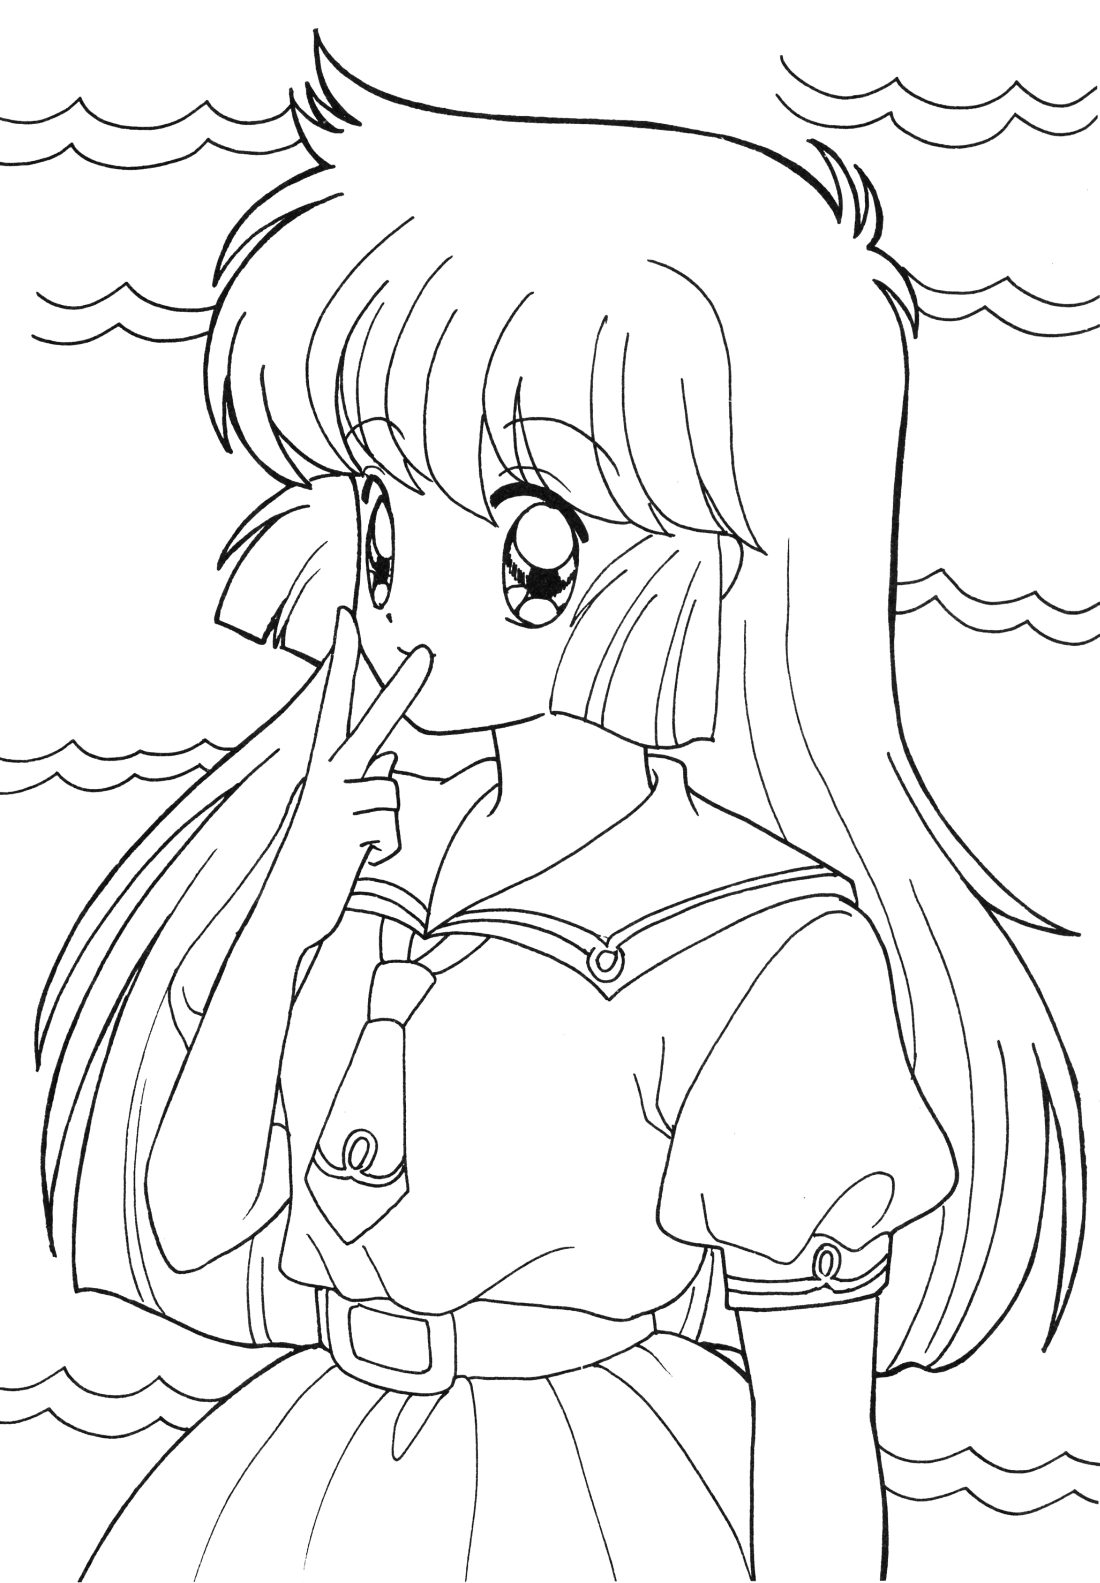 anime color page anime coloring pages best coloring pages for kids color anime page 